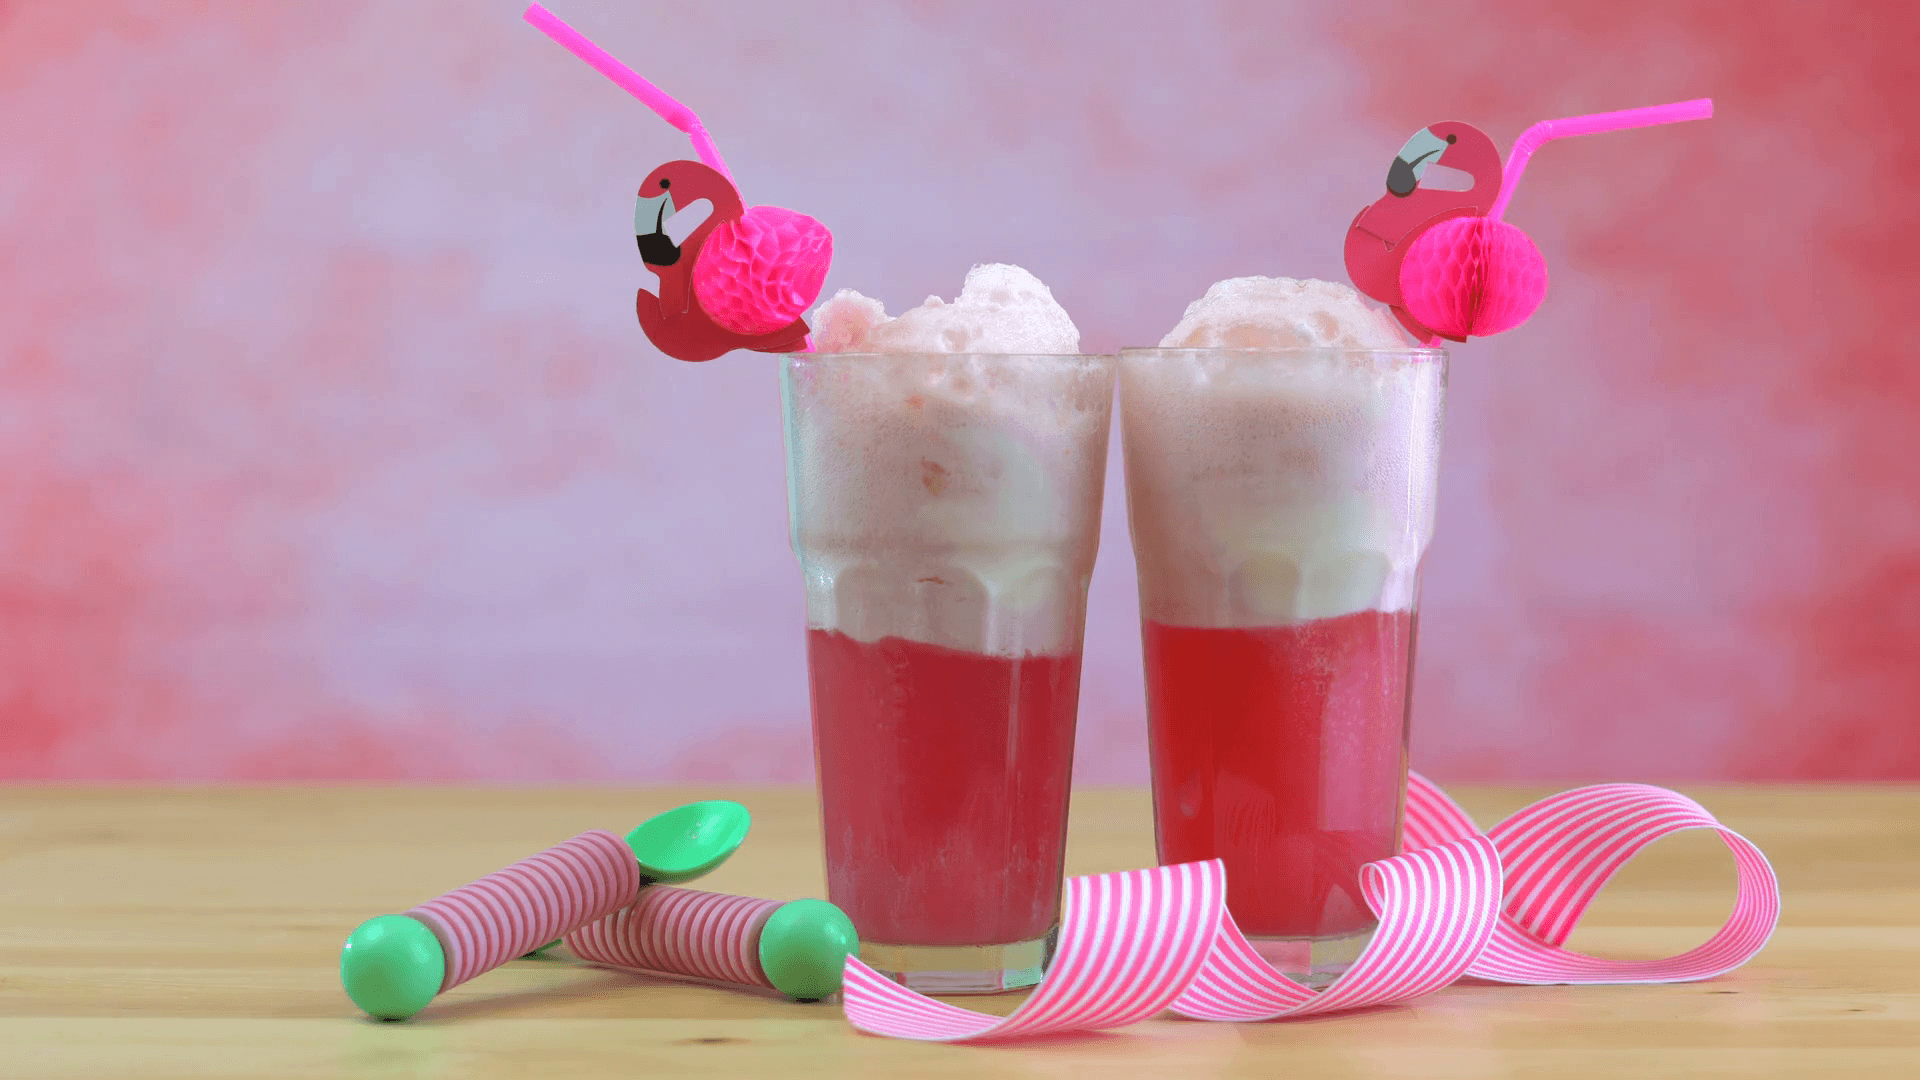 Making ice cream soda floats with pink raspberry soda and ice cream